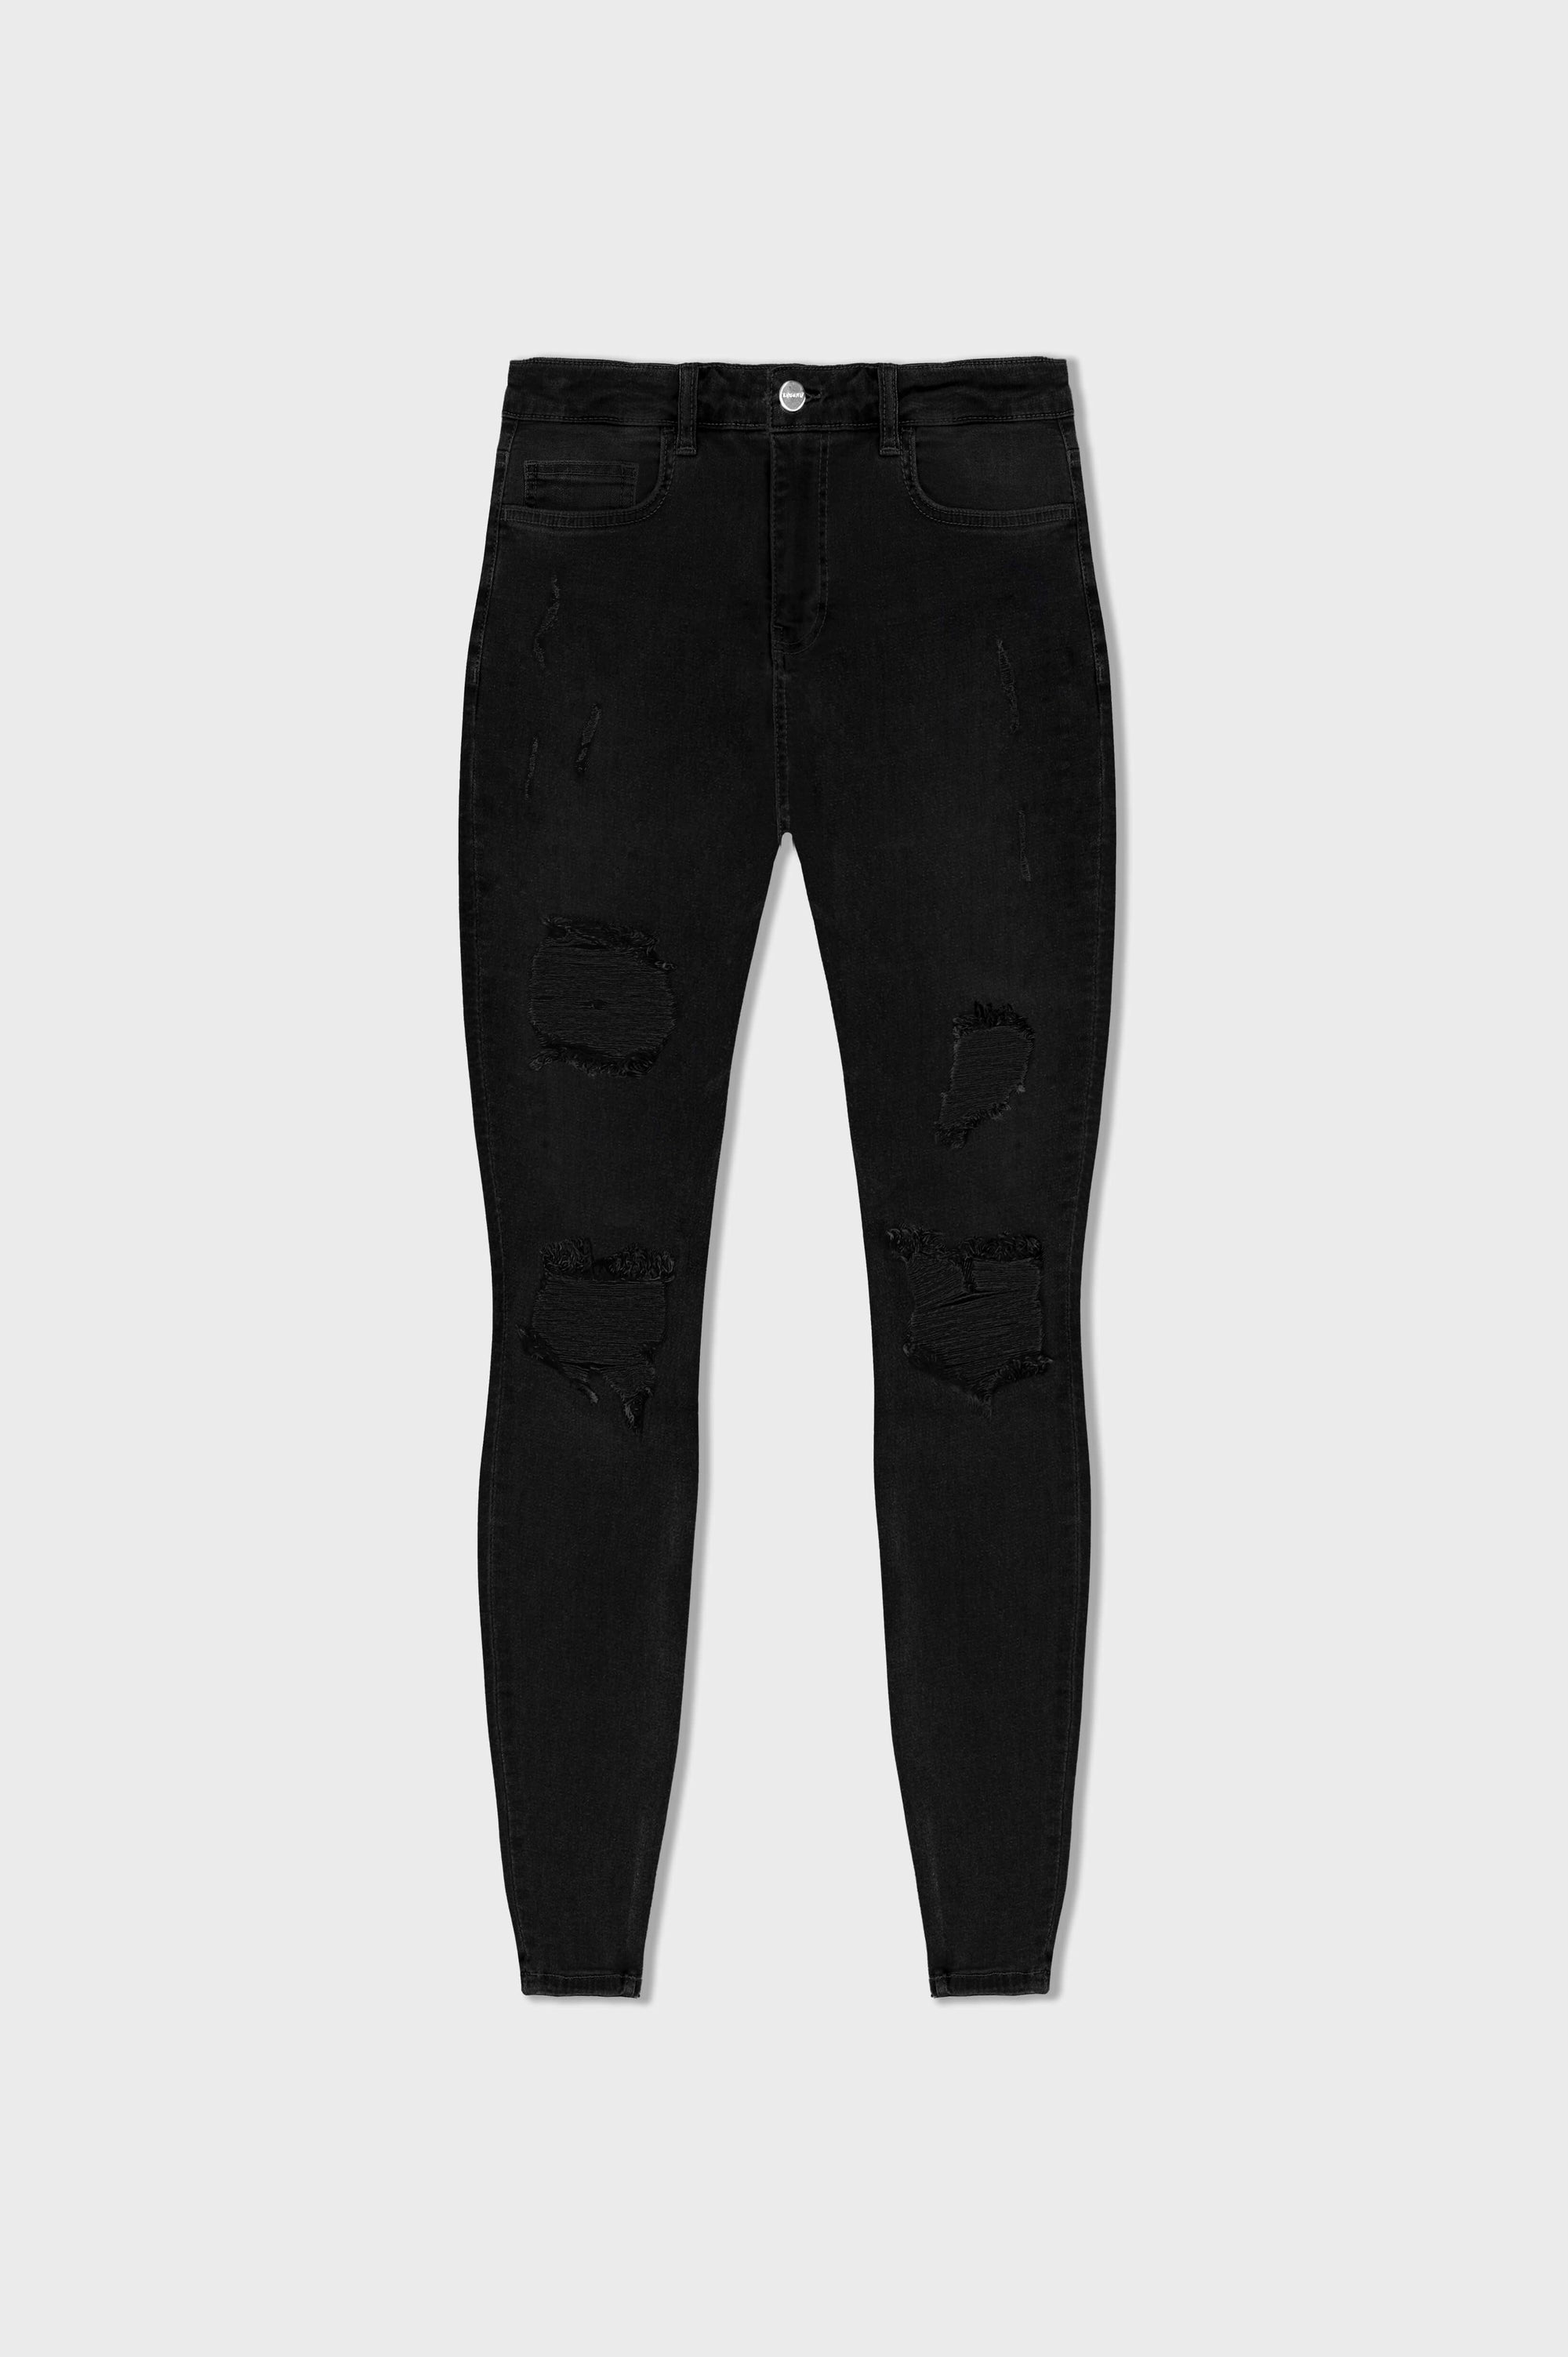 BLACK JEANS - RIPPED & REPAIRED – Legend London